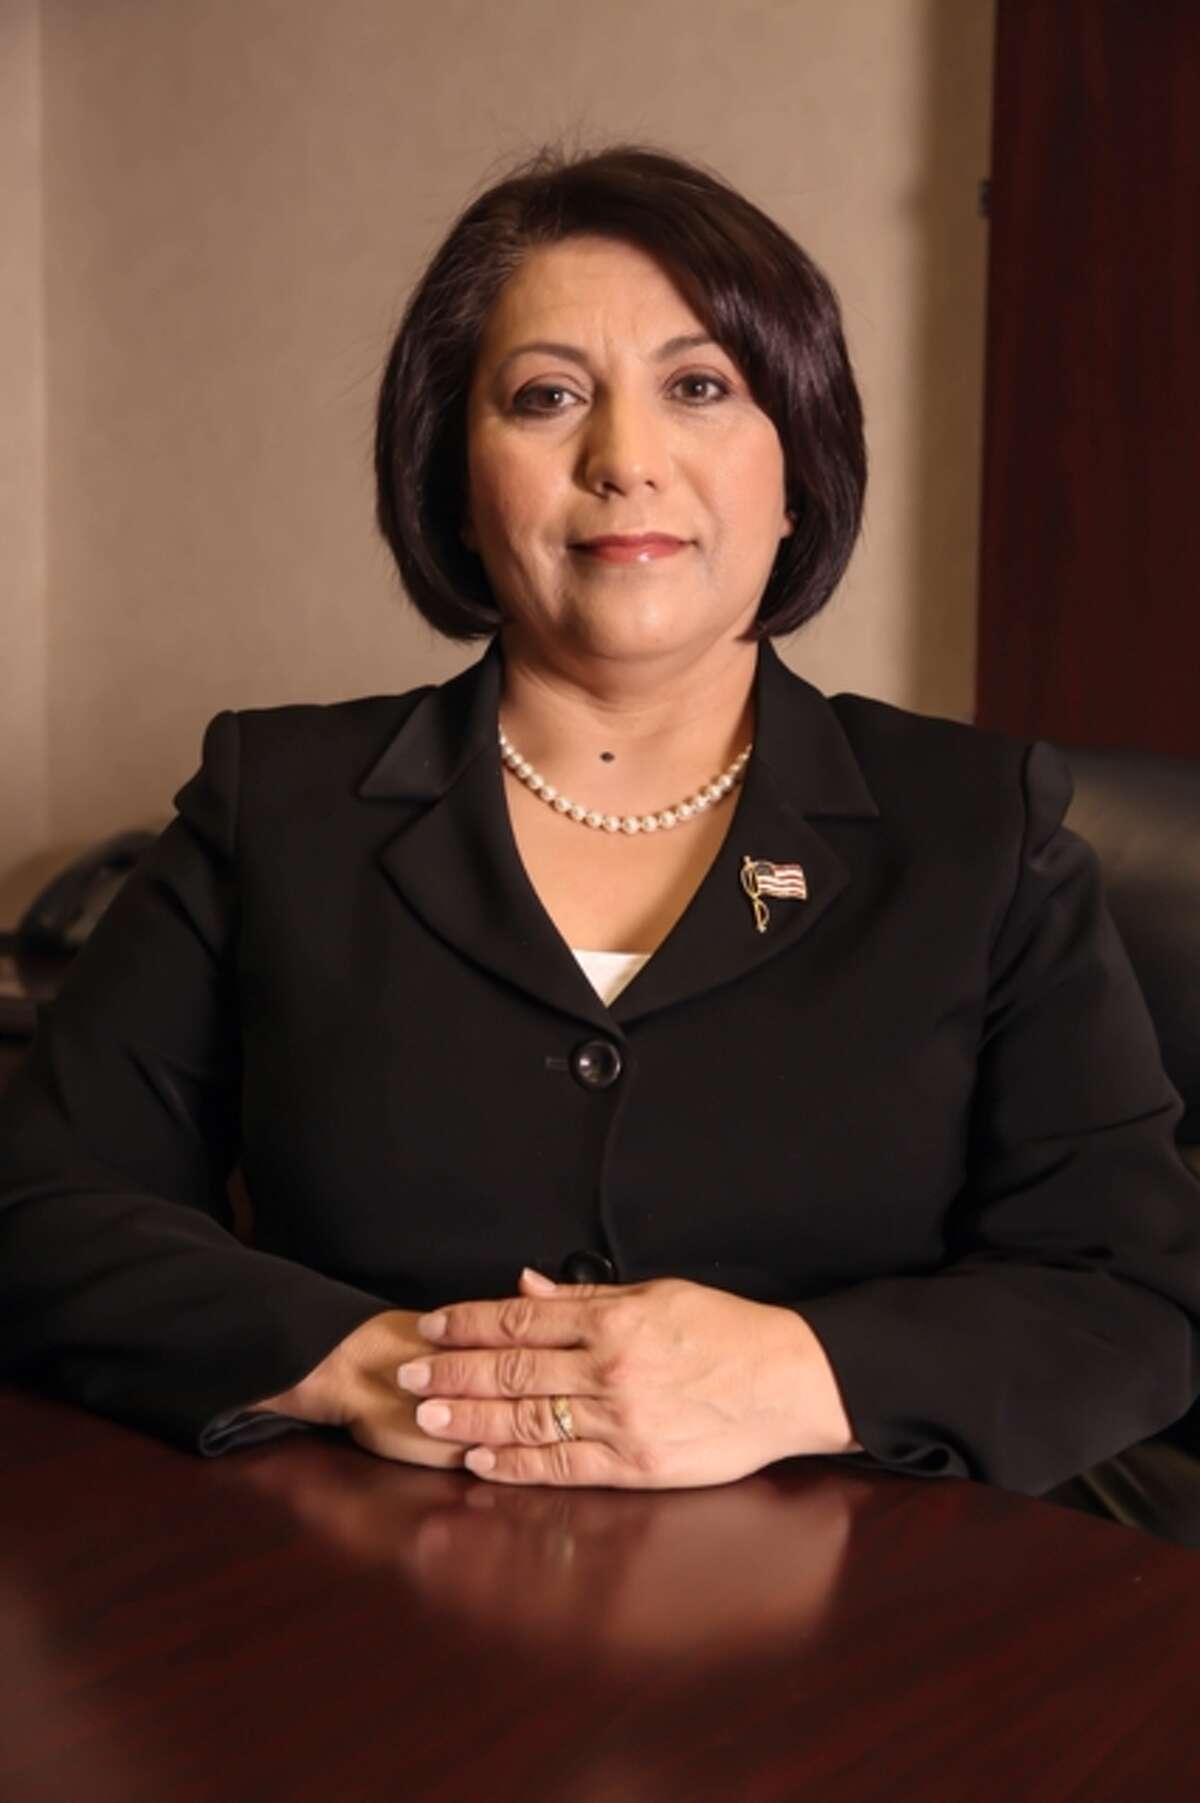 Gov. Rick Perry has appointed Maggie Jaramillo, 53, of Richmond as judge of the 400th Judicial District Court in Fort Bend County for a term to expire at the 2016 general election.